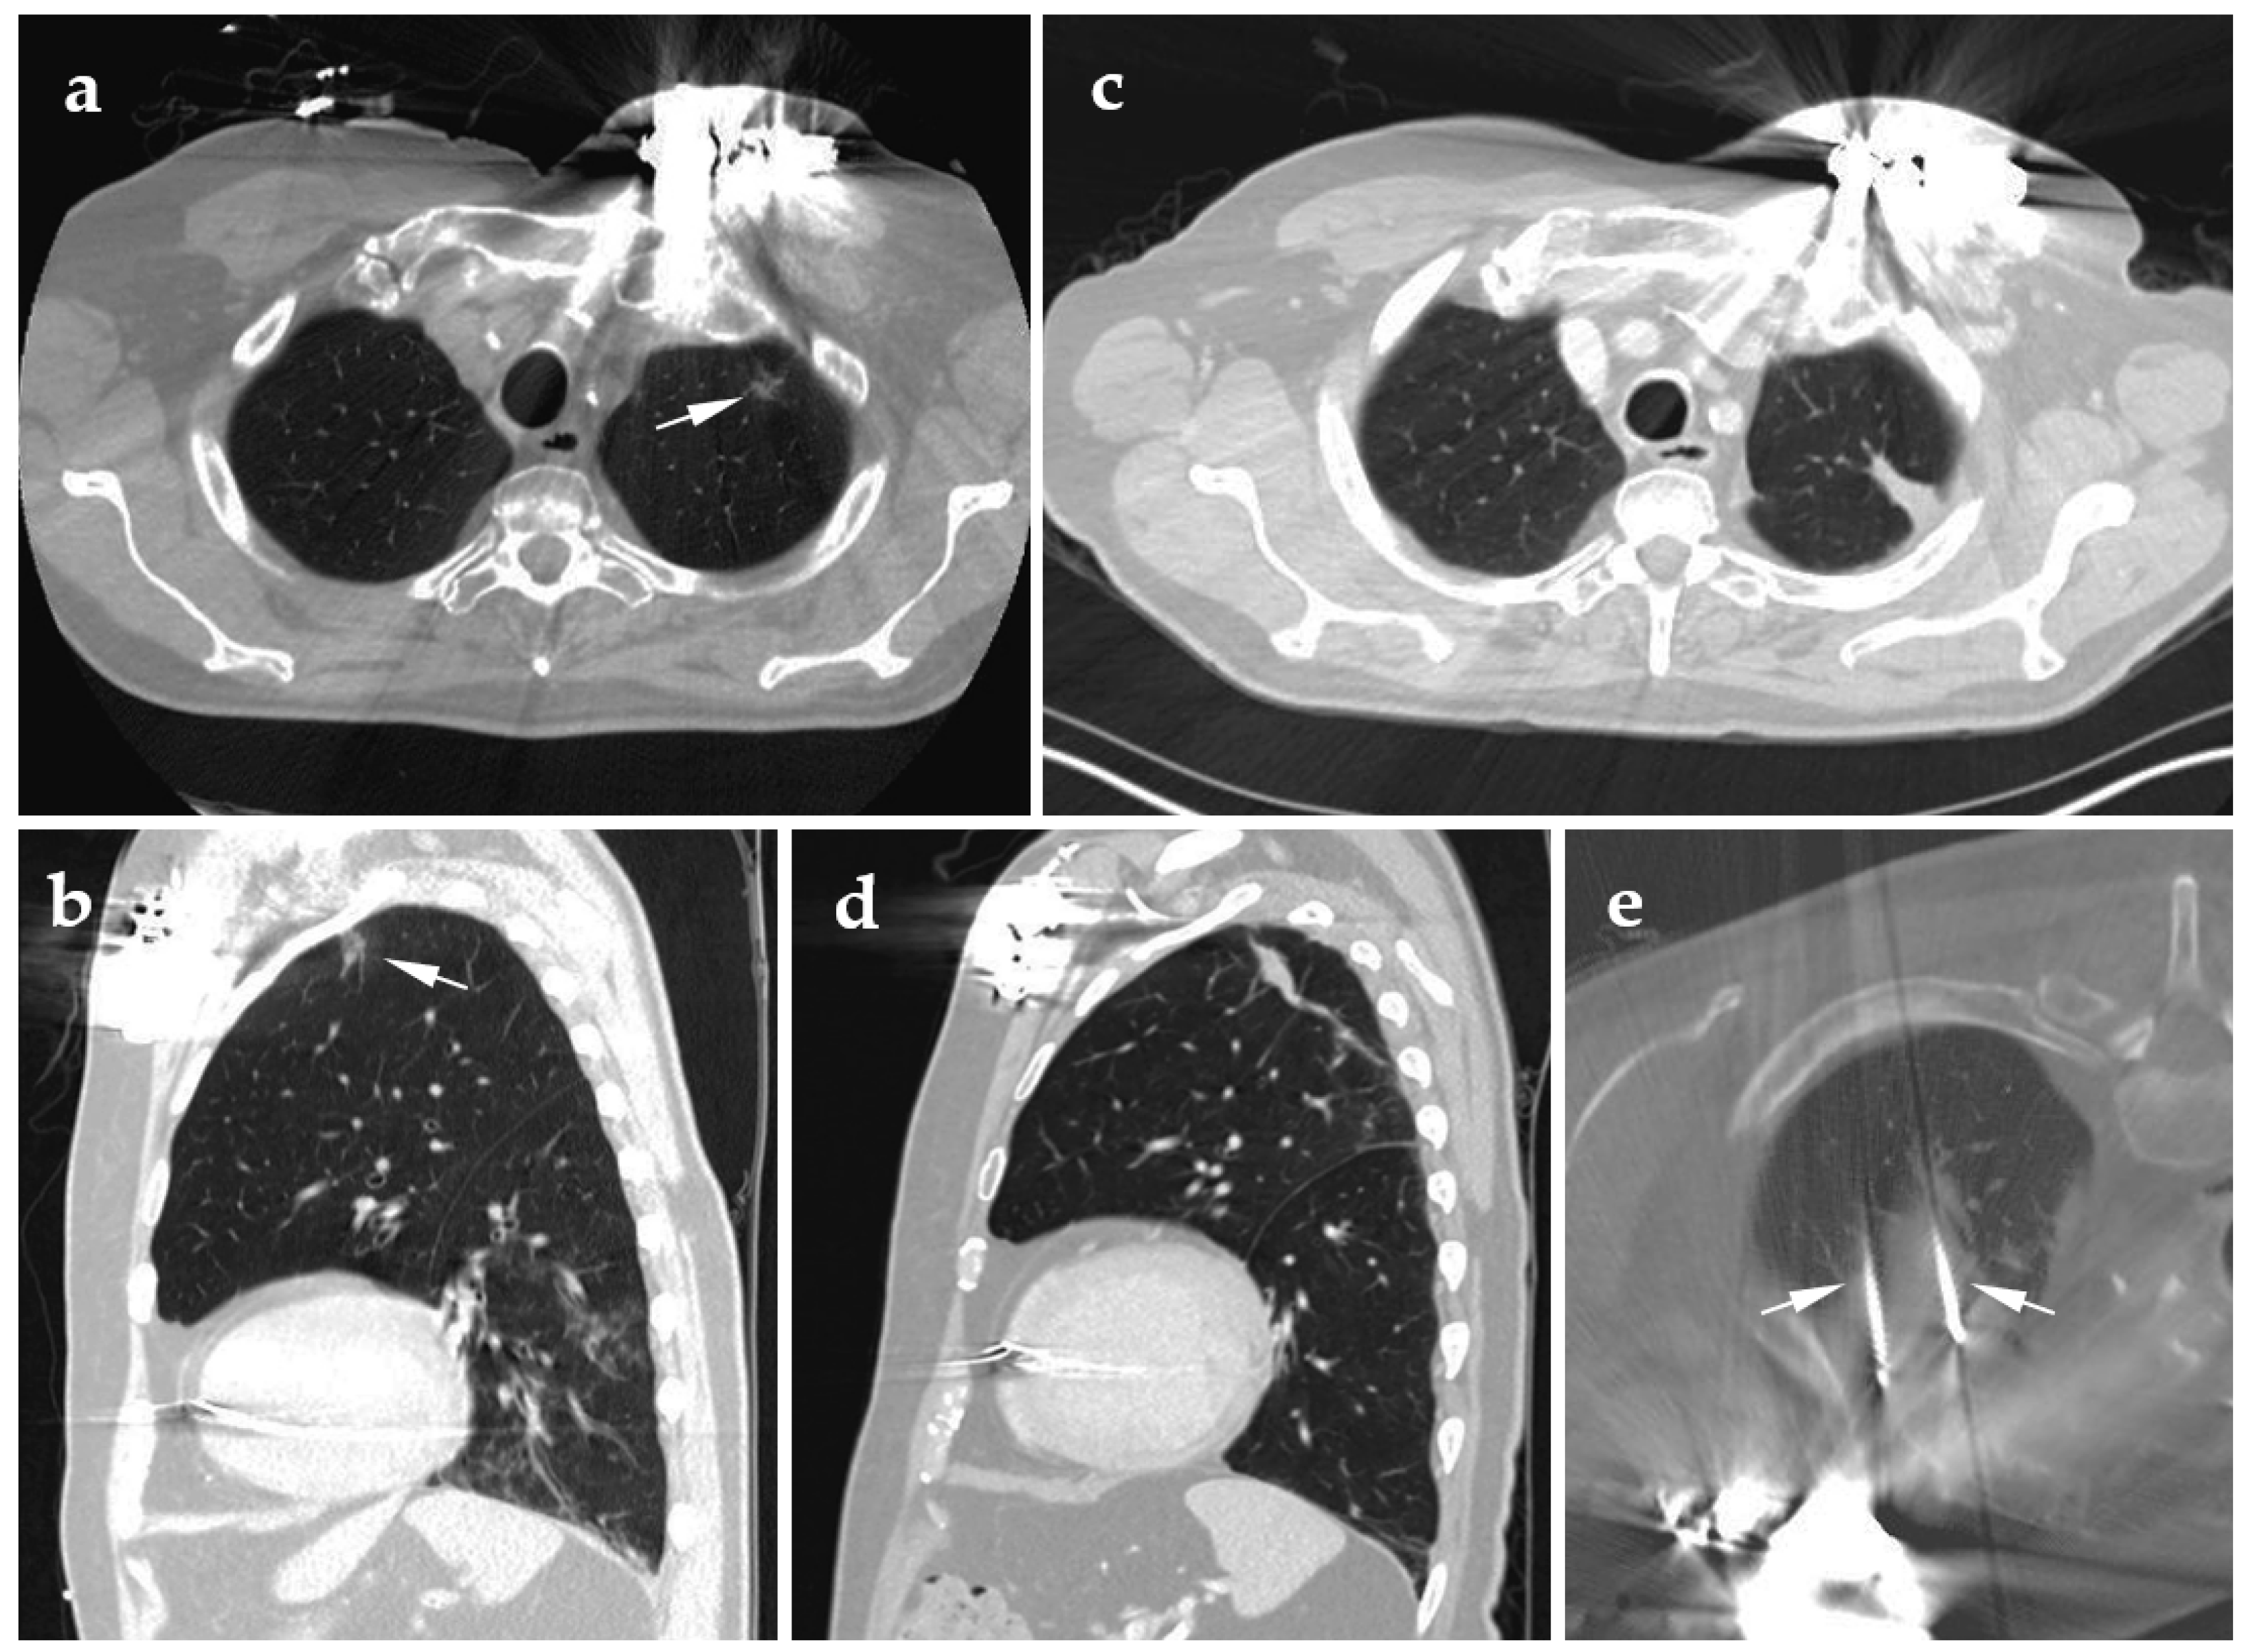 JCM | Free Full-Text | Percutaneous Image-Guided Ablation of Lung Tumors